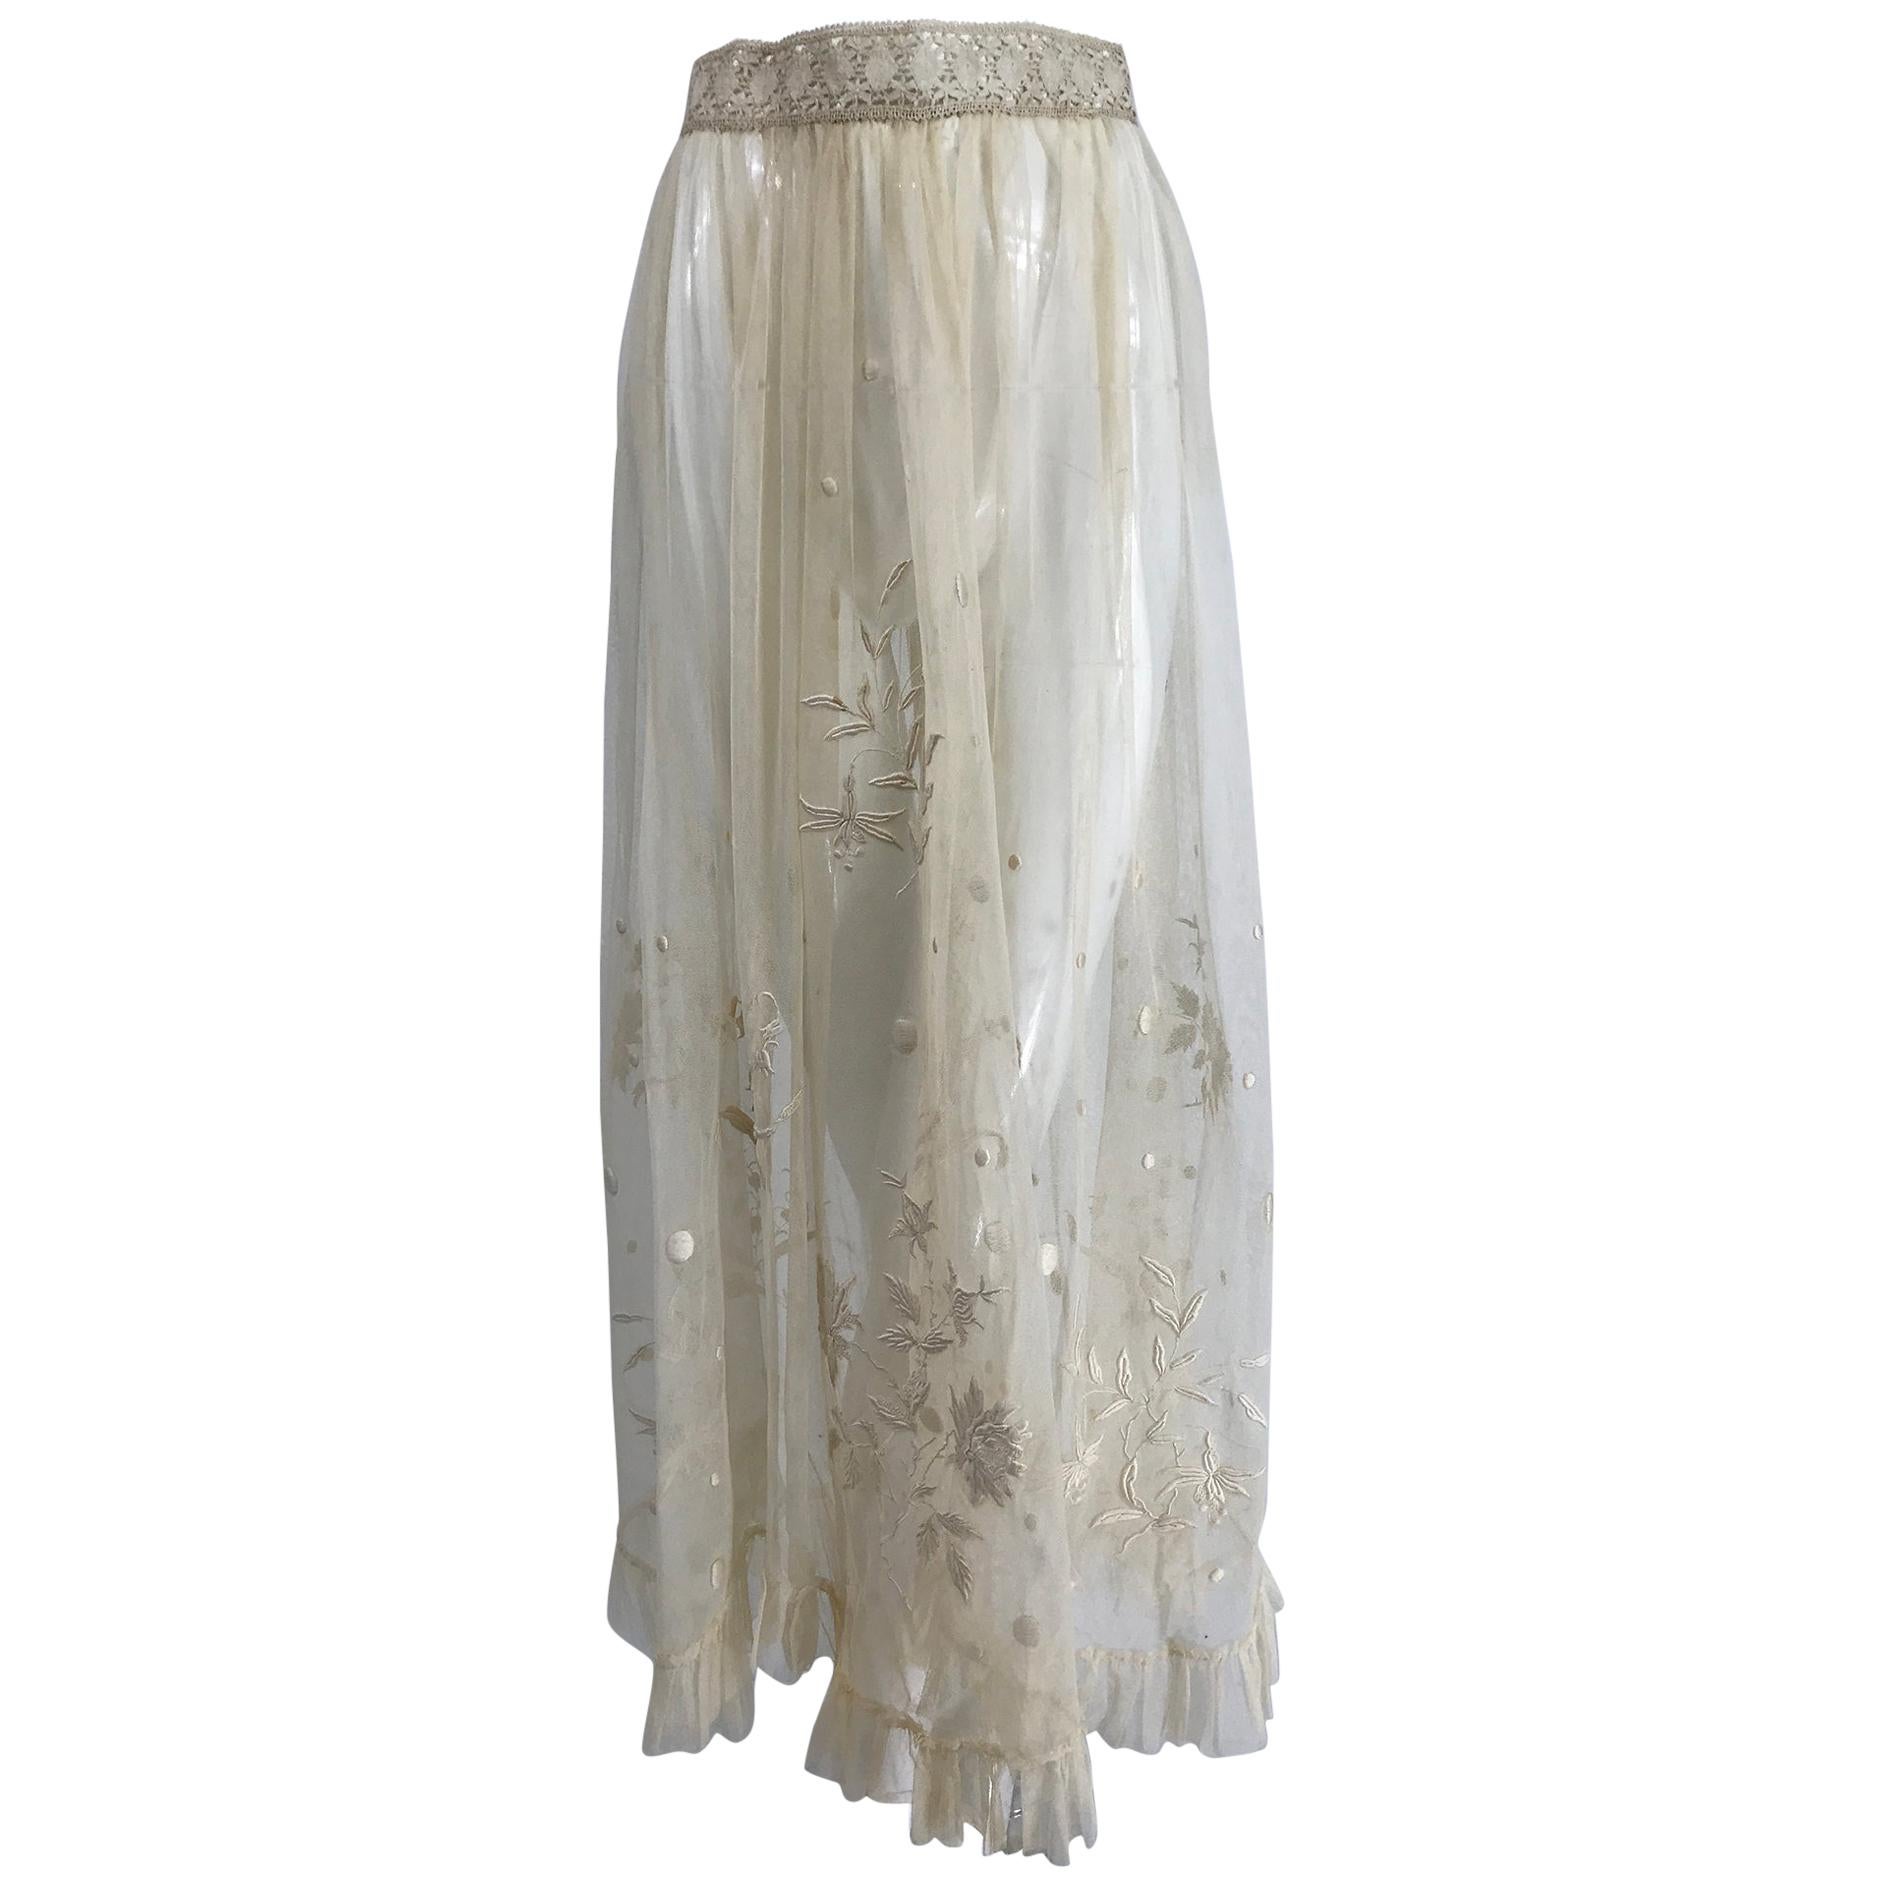 Edwardian Ecru Satin Stitch Embroidered Tulle Skirt 1900s For Sale